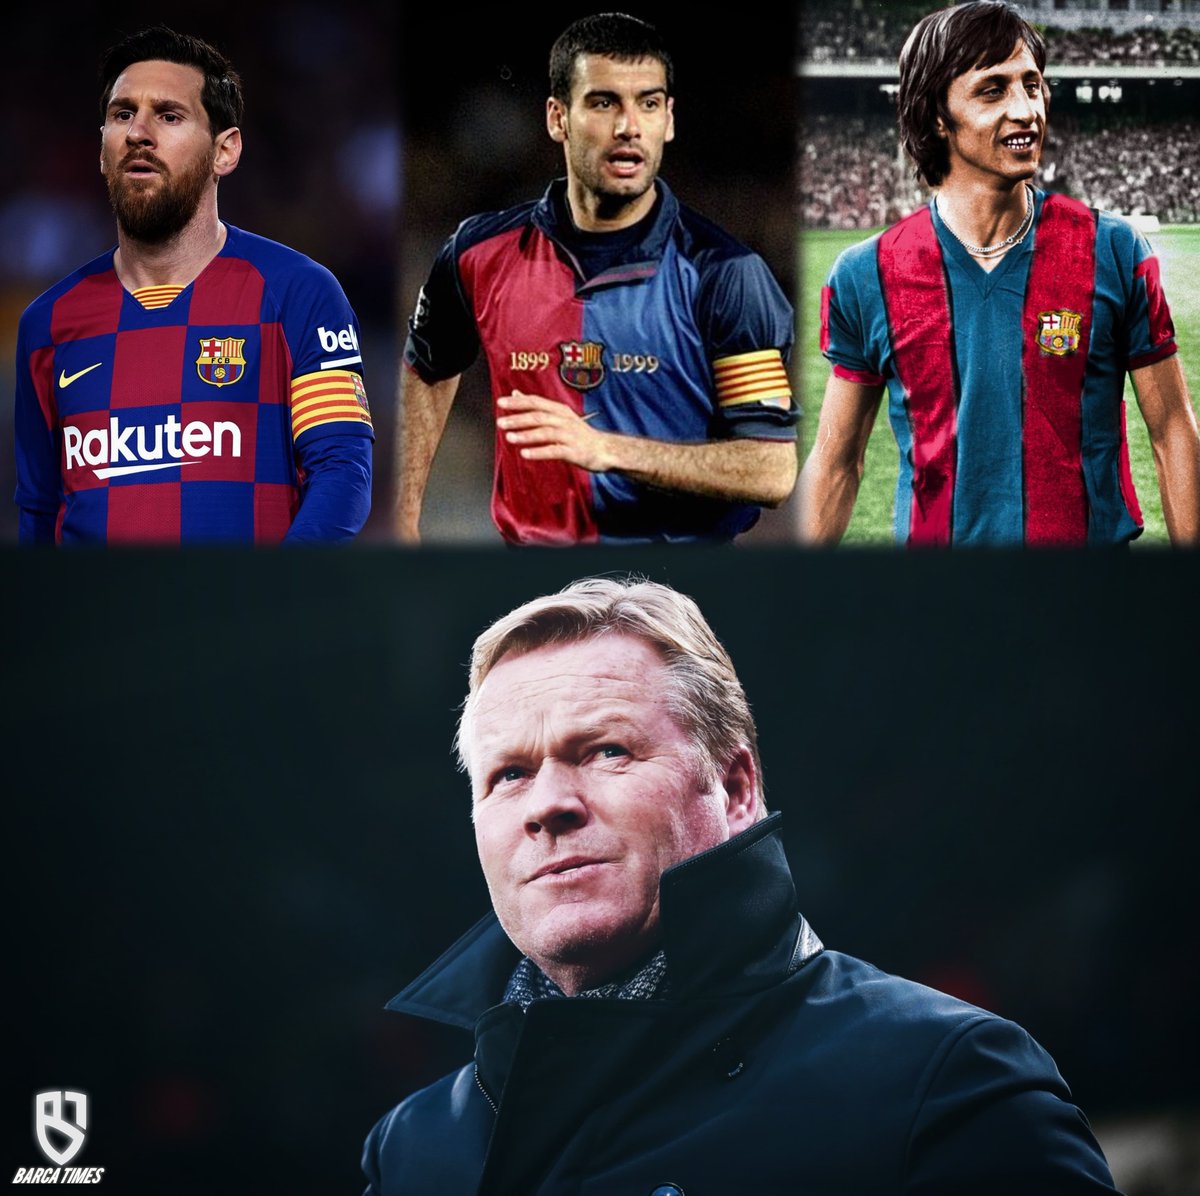 🚨🎙️| Koeman: 'There are 3 people that represent the Barça DNA. Johan Cruyff, Pep Guardiola and Lionel Messi. With Messi you don't even need to talk about DNA because he's the greatest of all time.' #fcblive